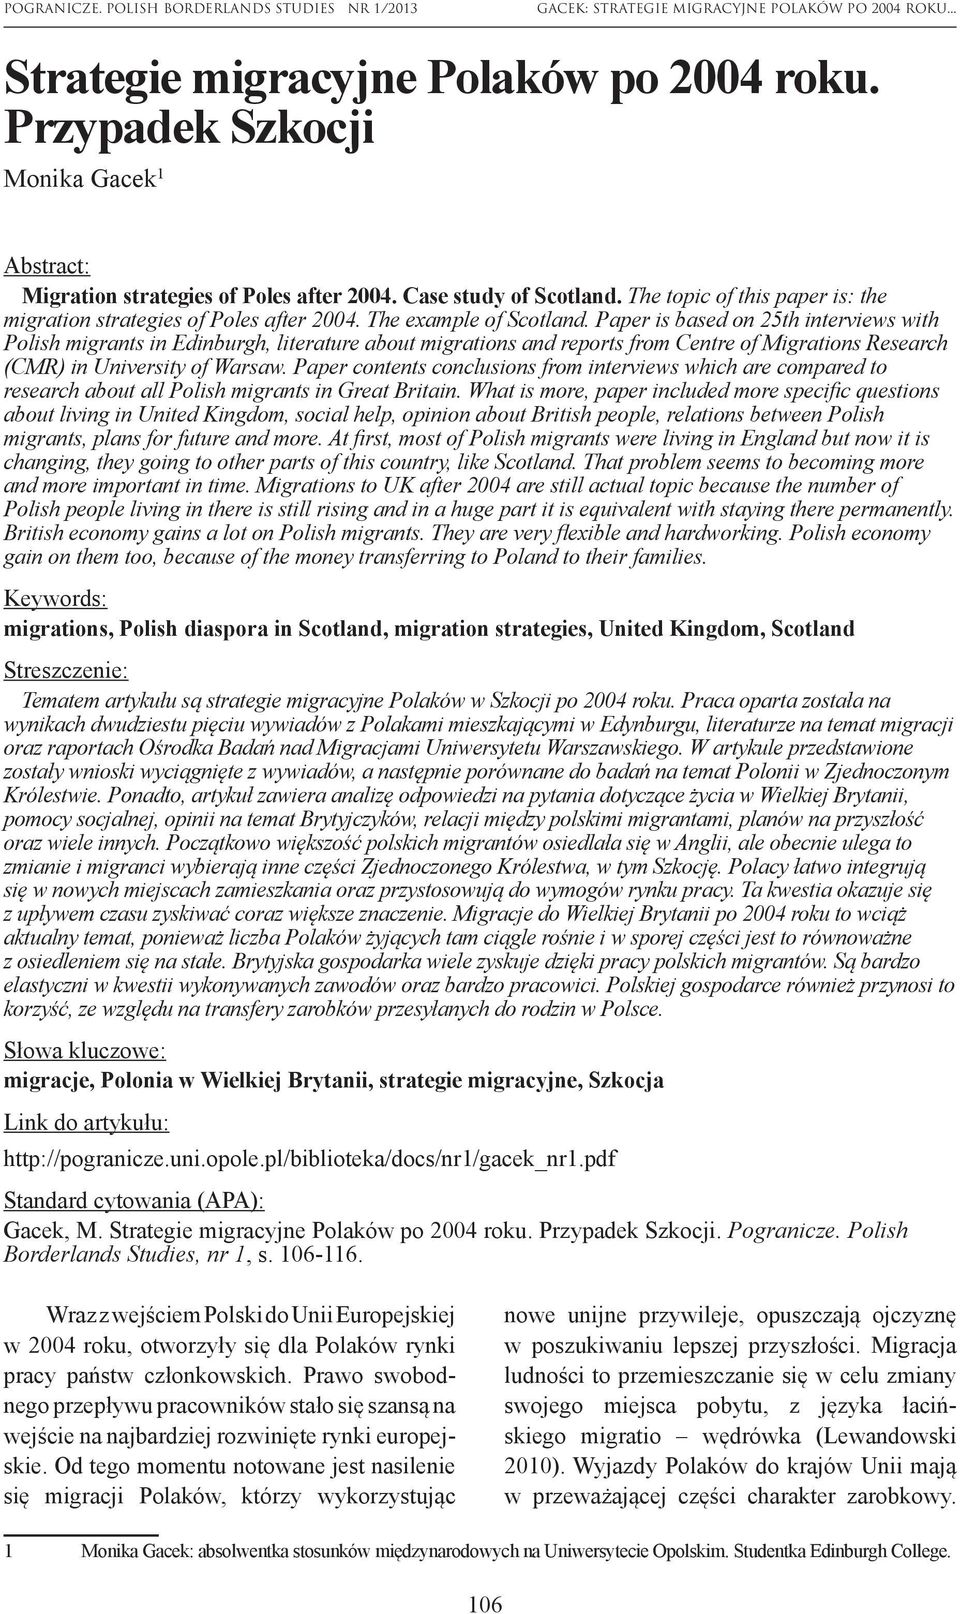 Paper is based on 25th interviews with Polish migrants in Edinburgh, literature about migrations and reports from Centre of Migrations Research (CMR) in University of Warsaw.